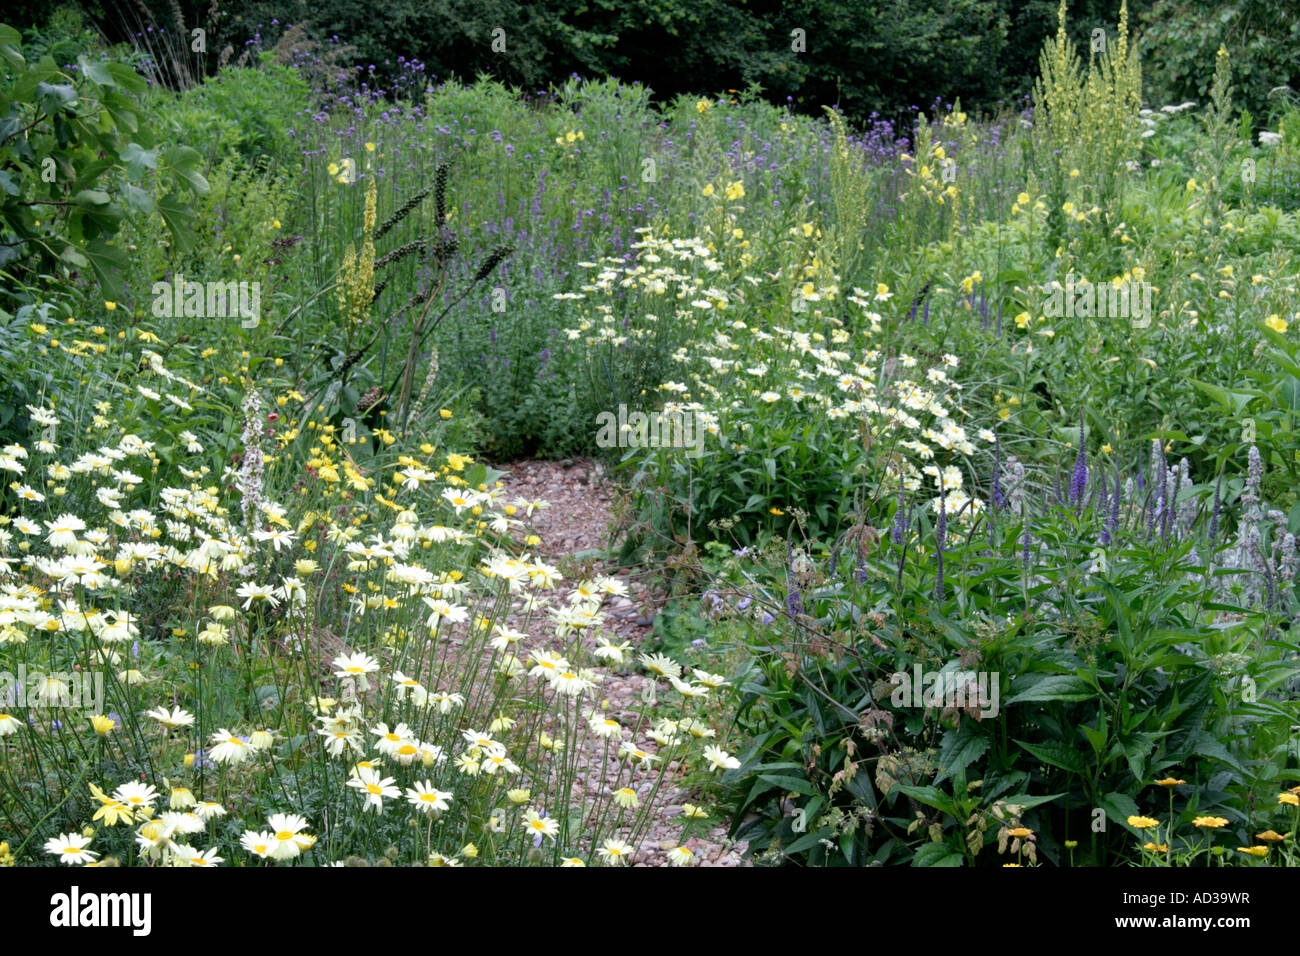 Part of the stone garden at Holbrook Devon late June with Anthemis E C Buxton and Anthemis Wargrave variety the paler daisy Stock Photo